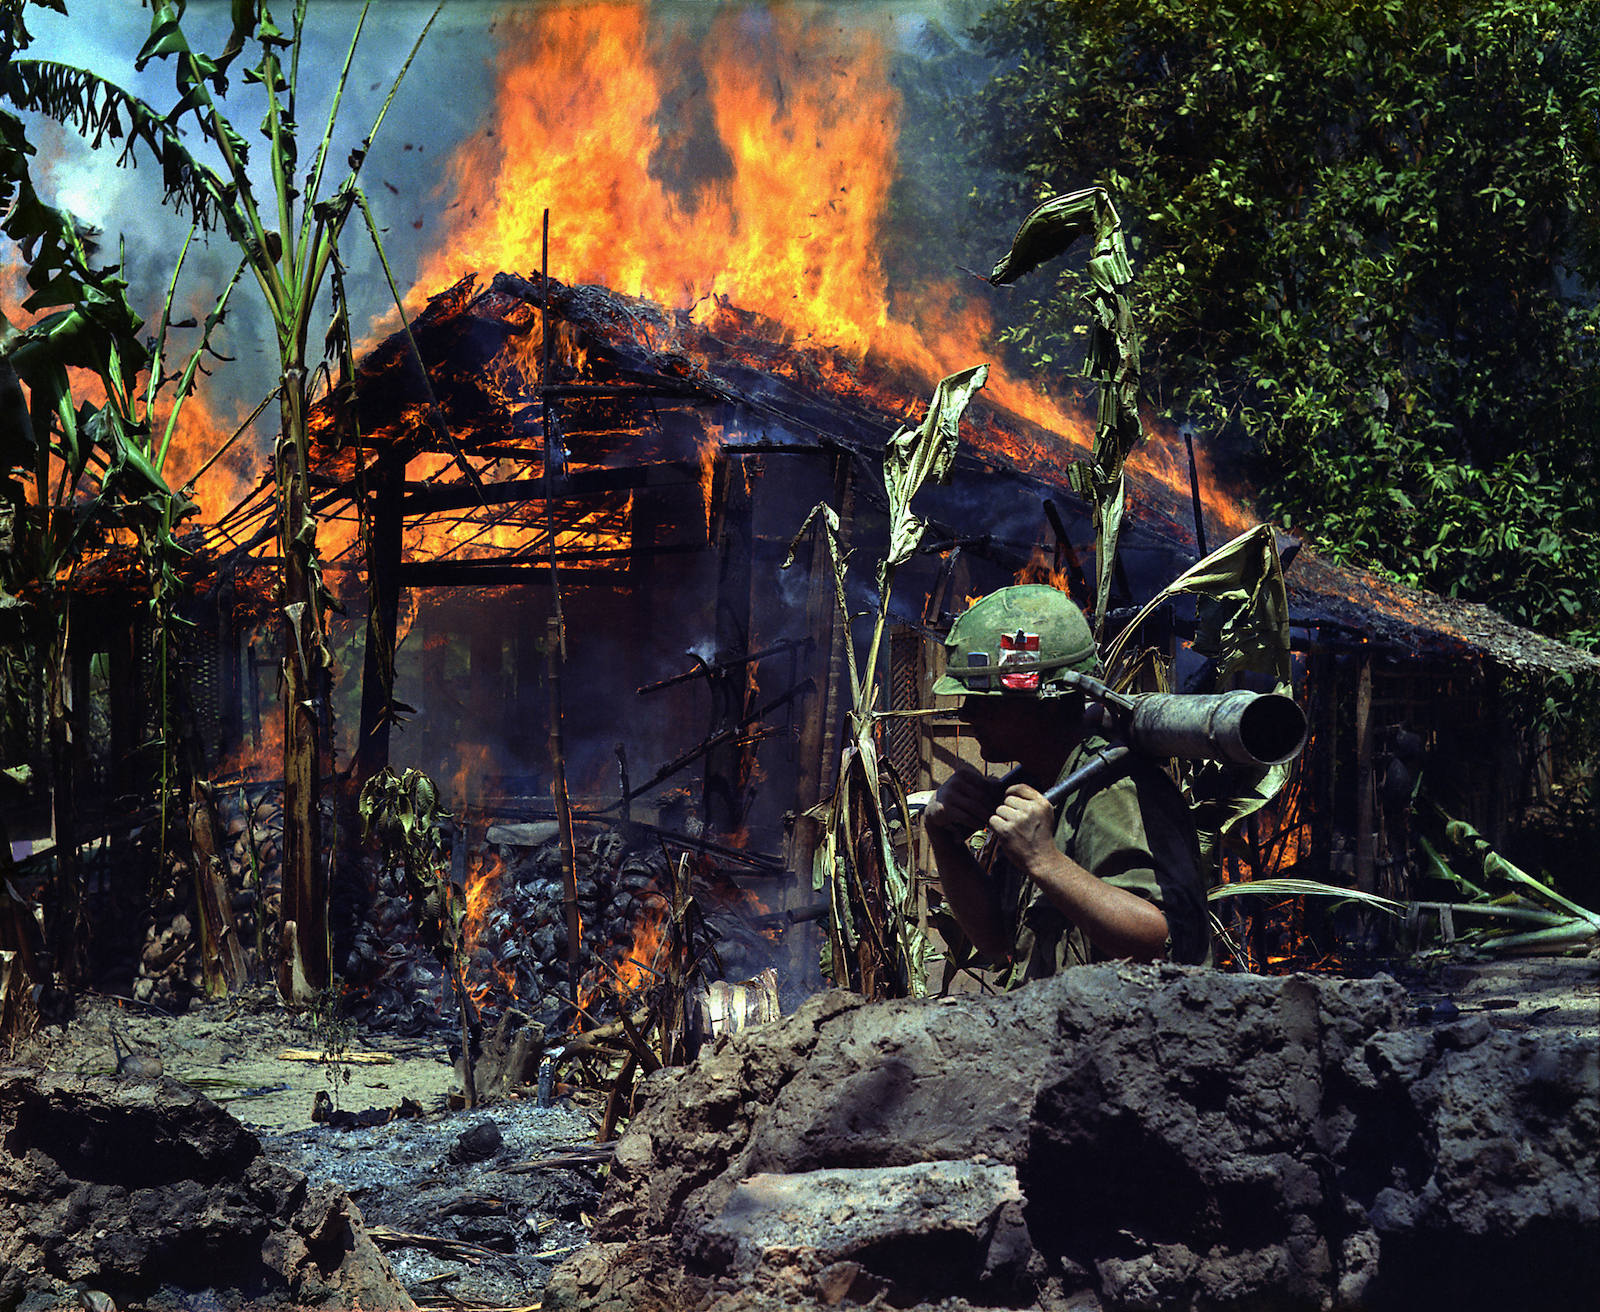 A suspected Viet Cong base camp in Mỹ Tho being razed by the US Army, 5 April 1968. US National Archives. Public Domain.